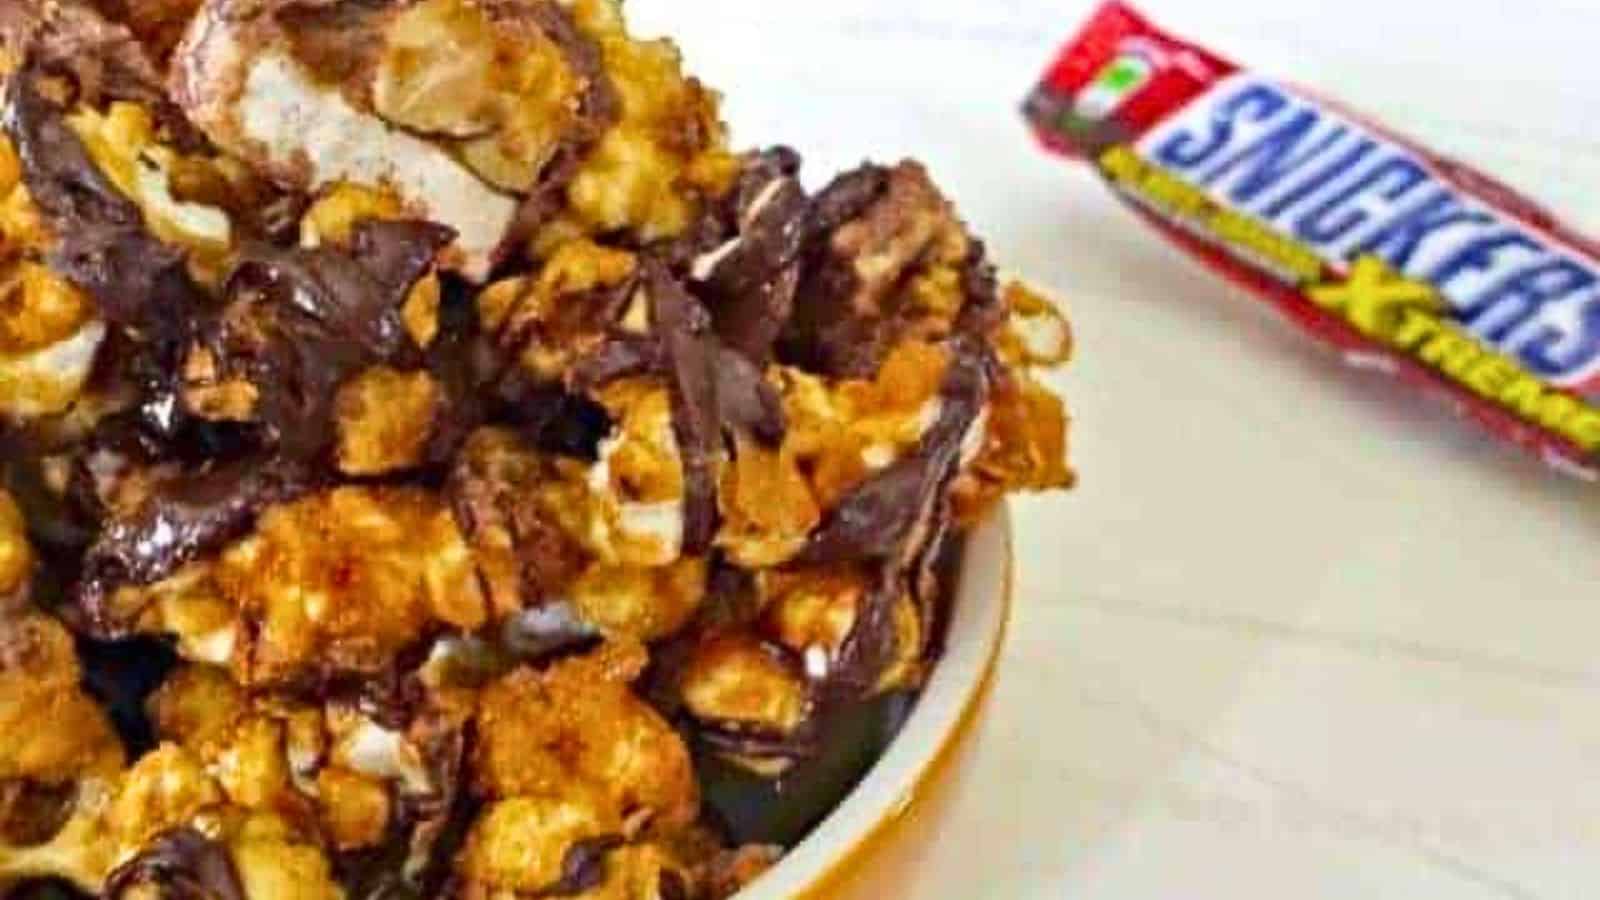 Image shows a bowl with Snickers Popcorn next to a Snicker's bar.